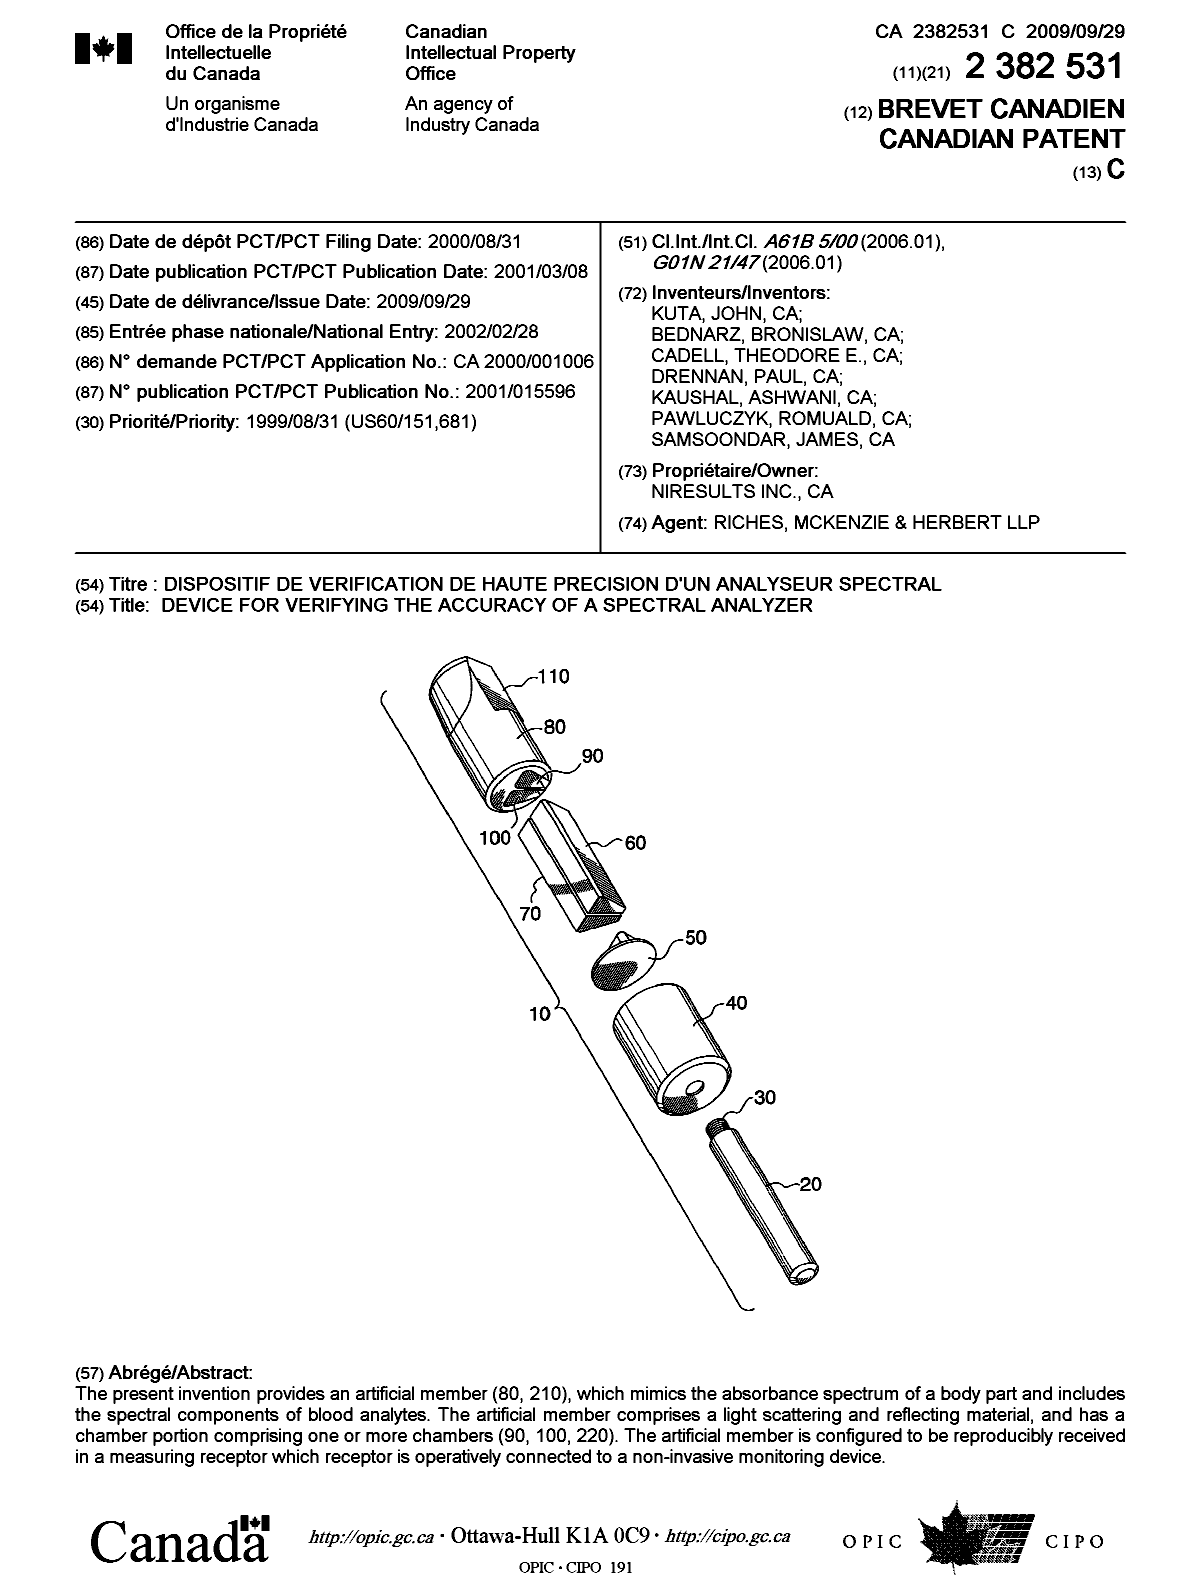 Canadian Patent Document 2382531. Cover Page 20090903. Image 1 of 1